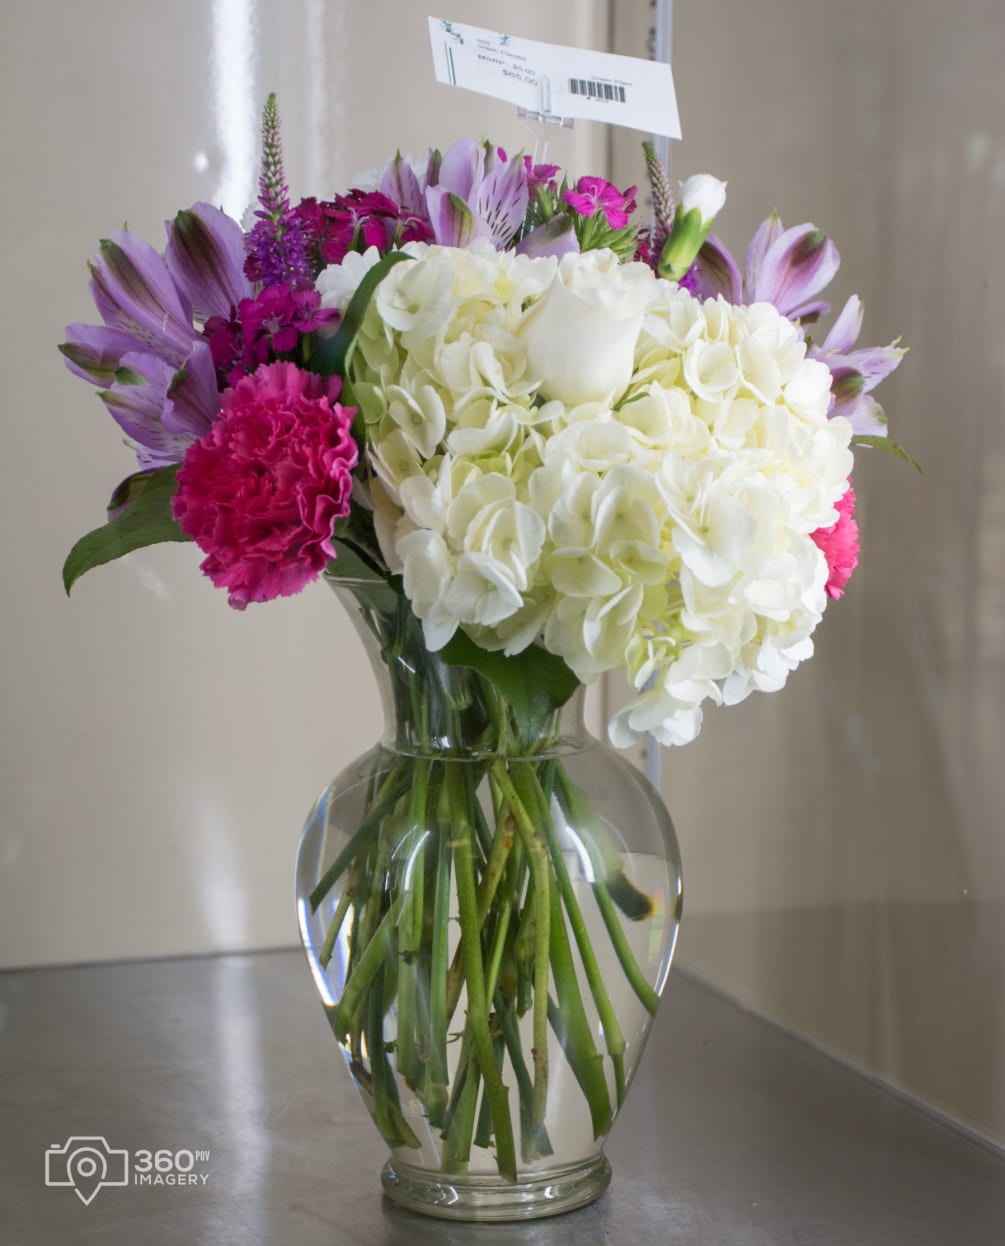 White hydrangea, white rose, hot pink carnations, lavender alstroemeria, accented with pinks